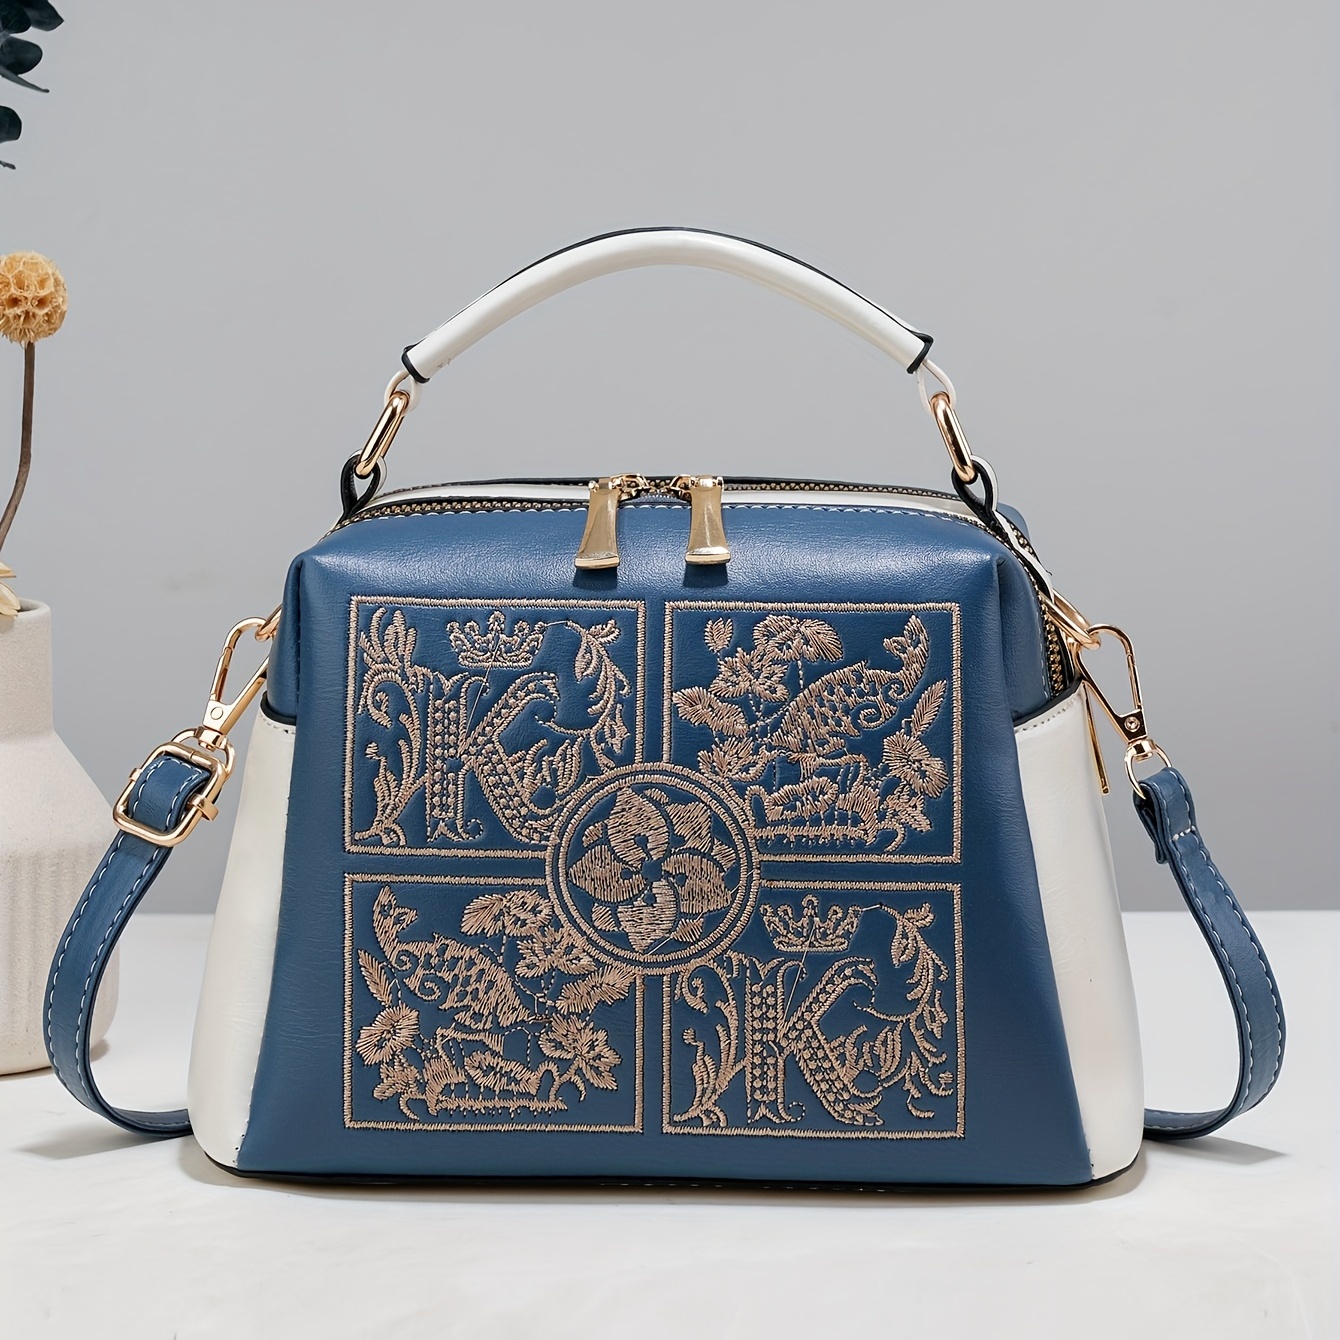 Women Fashion Embroidered Handbag with Zipper Crossbody Bag & Faux Leather Top Handle Purses